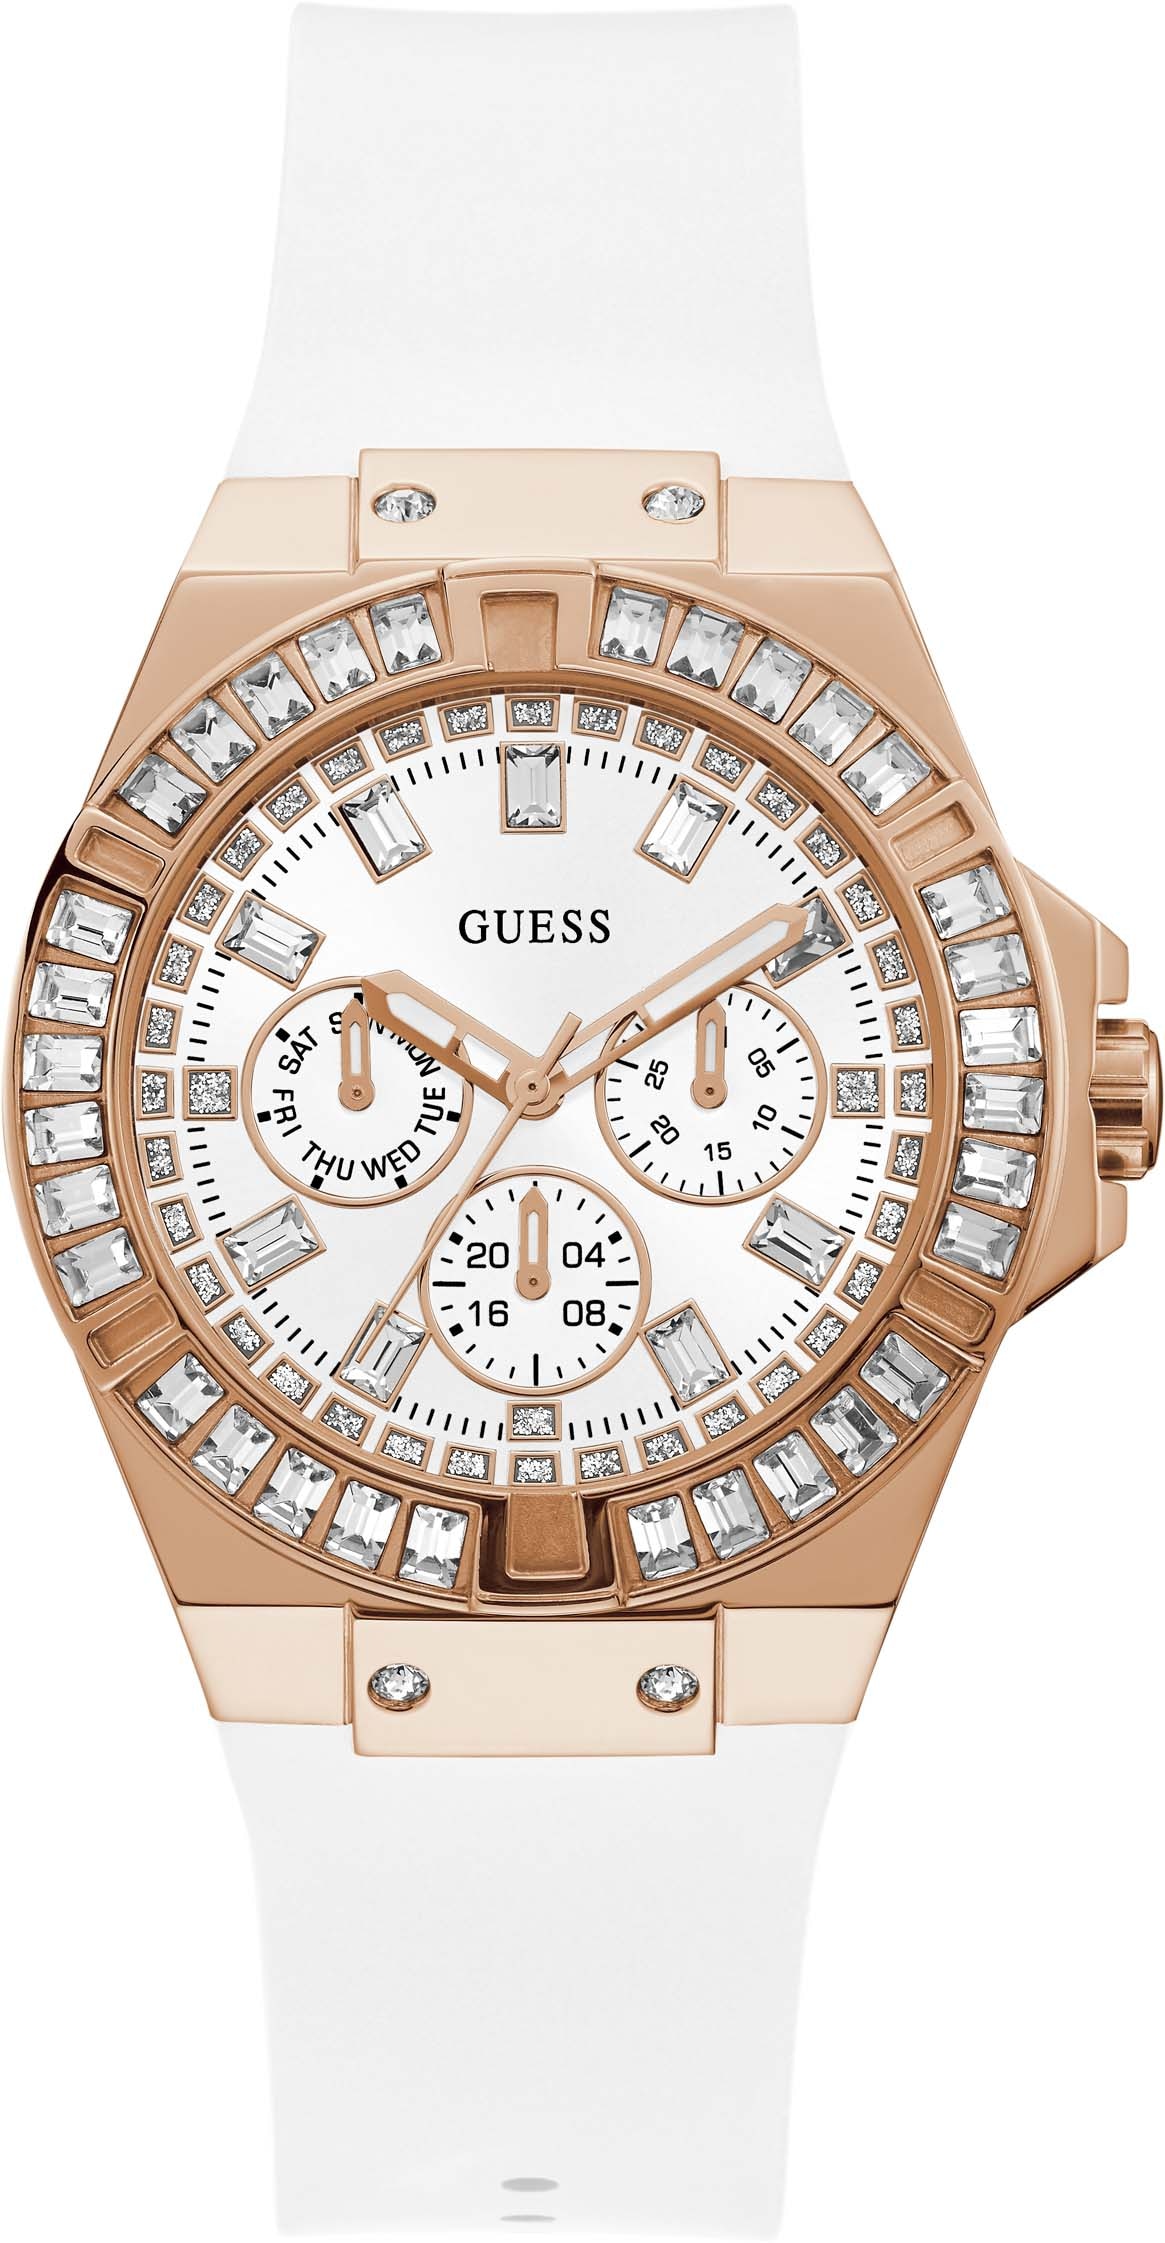 bei Multifunktionsuhr Guess OTTOversand »GW0118L4«